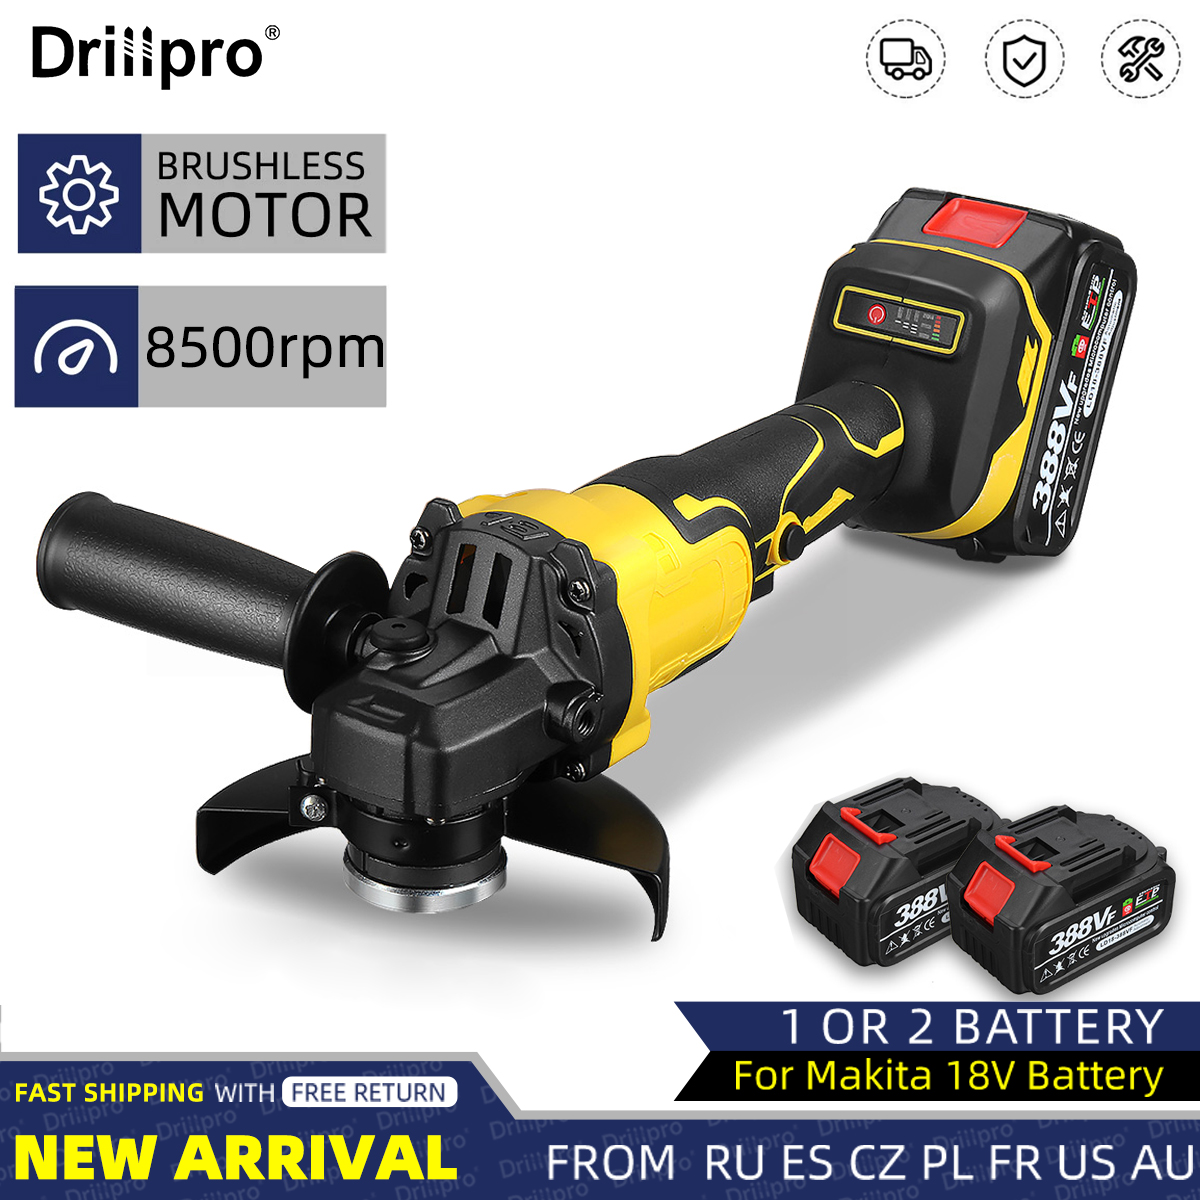 Drillpro-388VF-1280W-8500rpm-3-gears-125mm-Brushless-Lithium-Electric-Angle-Grinder-for-Makiita-18V--1962826-1